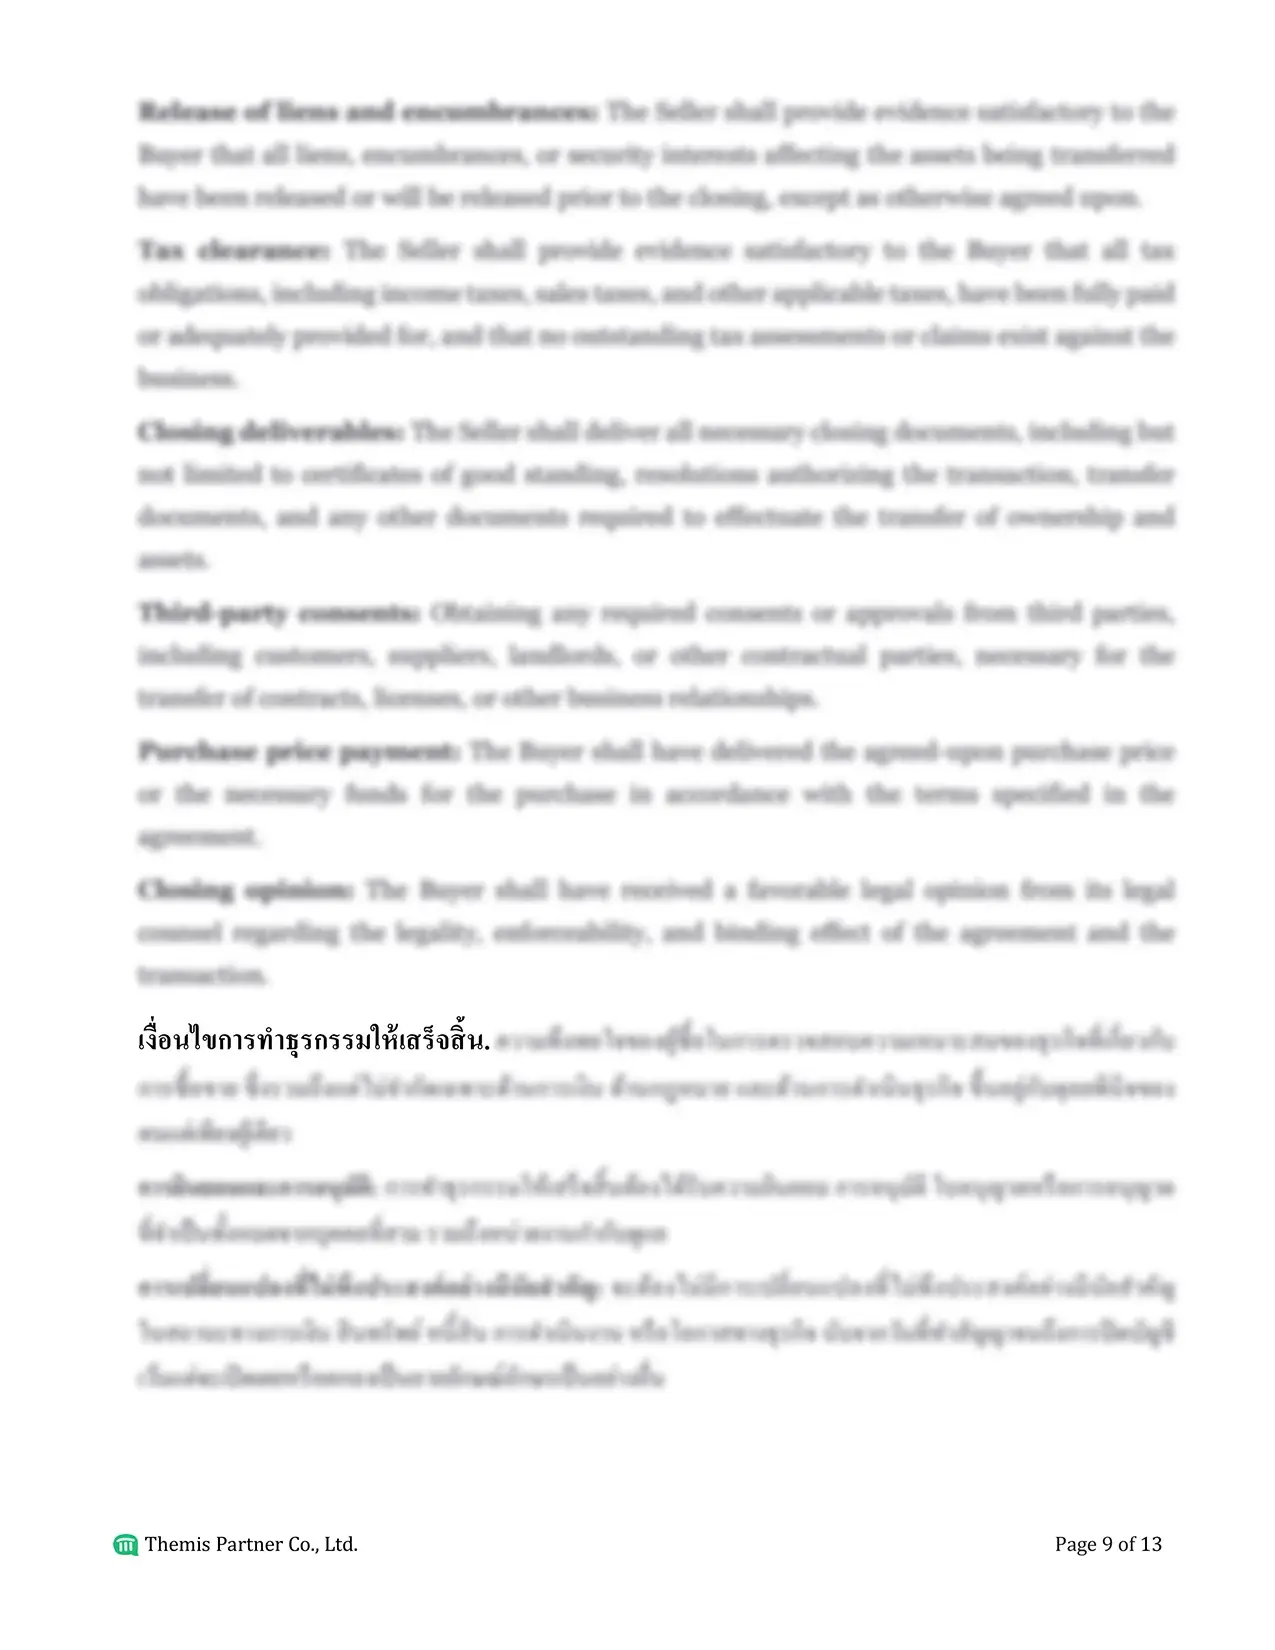 Business purchase agreement Thailand 9